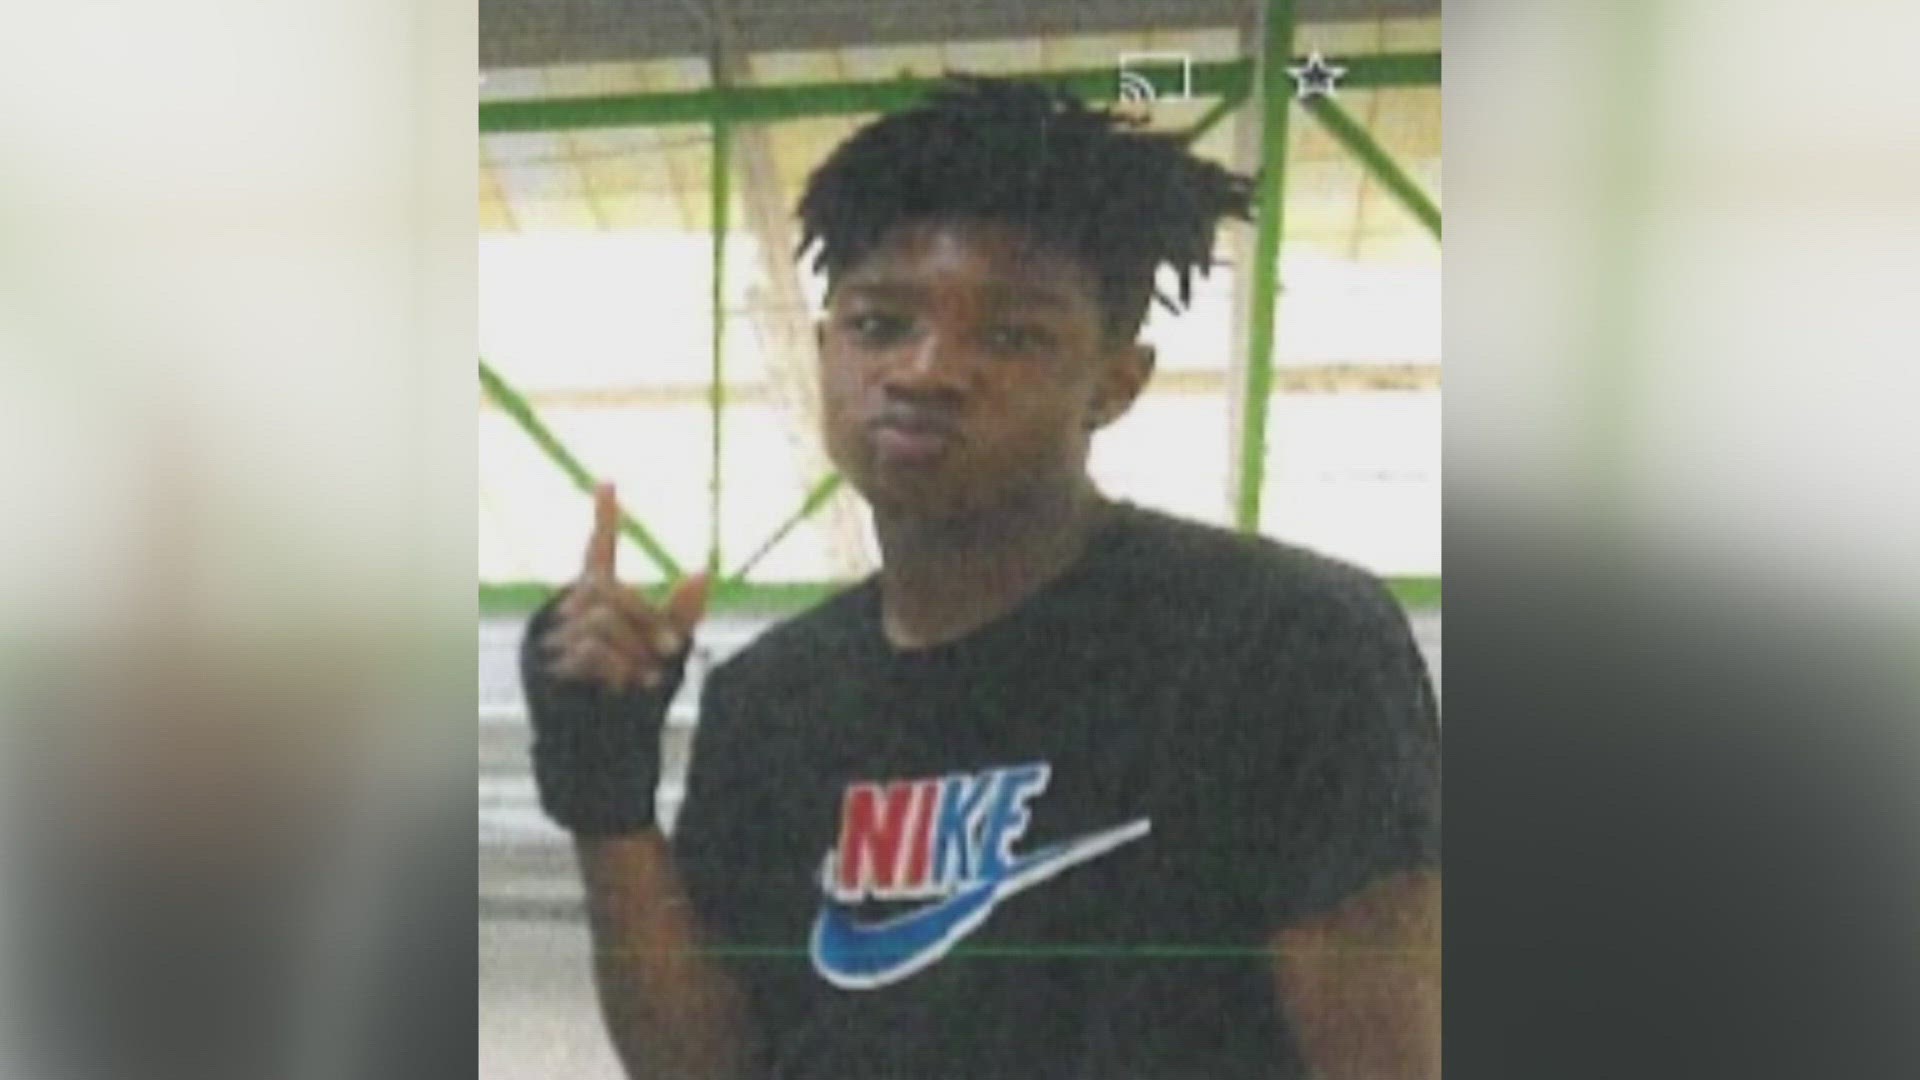 Keshaun Williams, who is 15 years old, has been missing since June 17 when authorities say he never returned home.